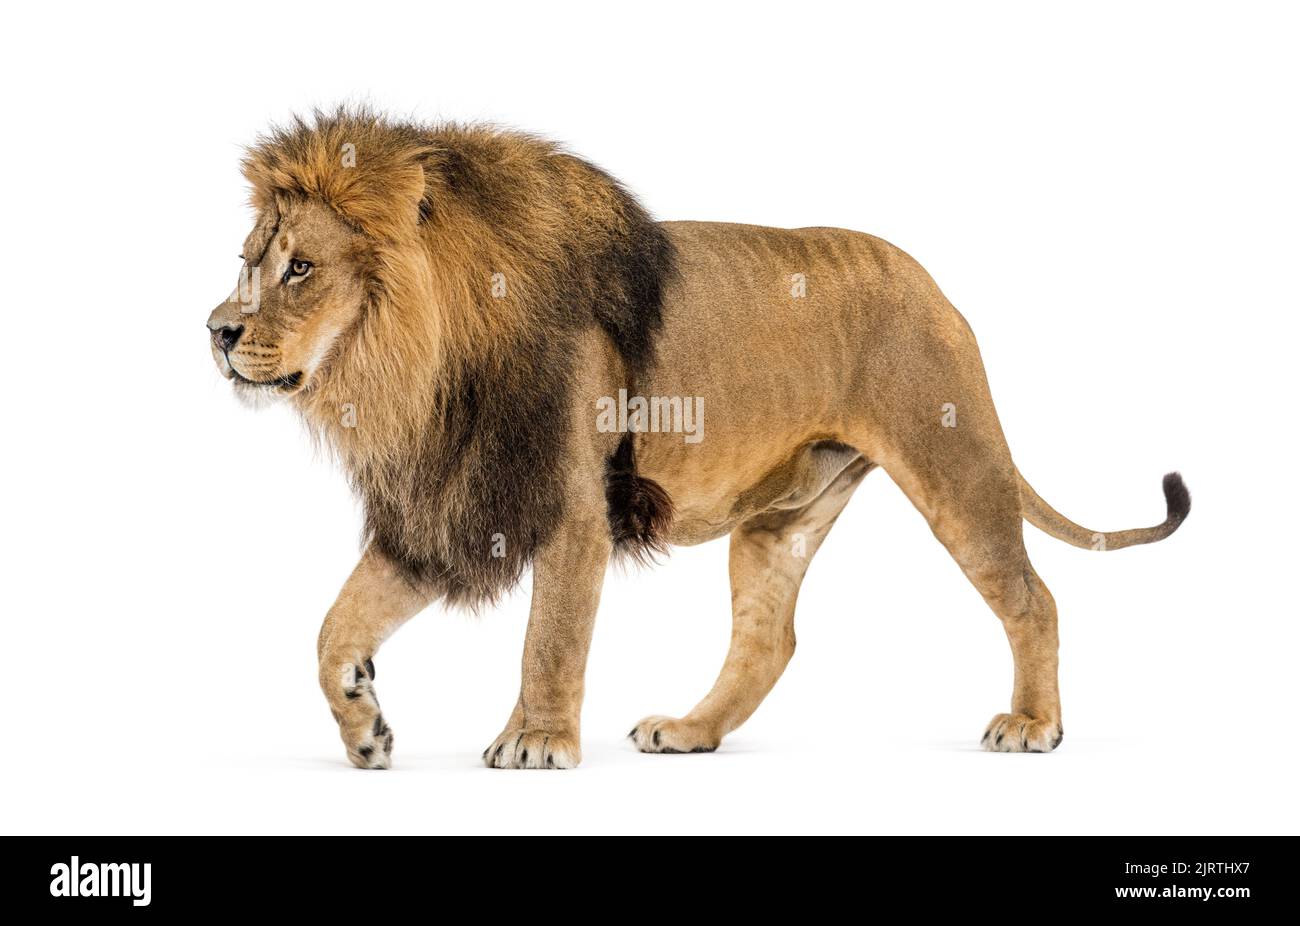 Side view of a lion walking away, isolated on white Stock Photo